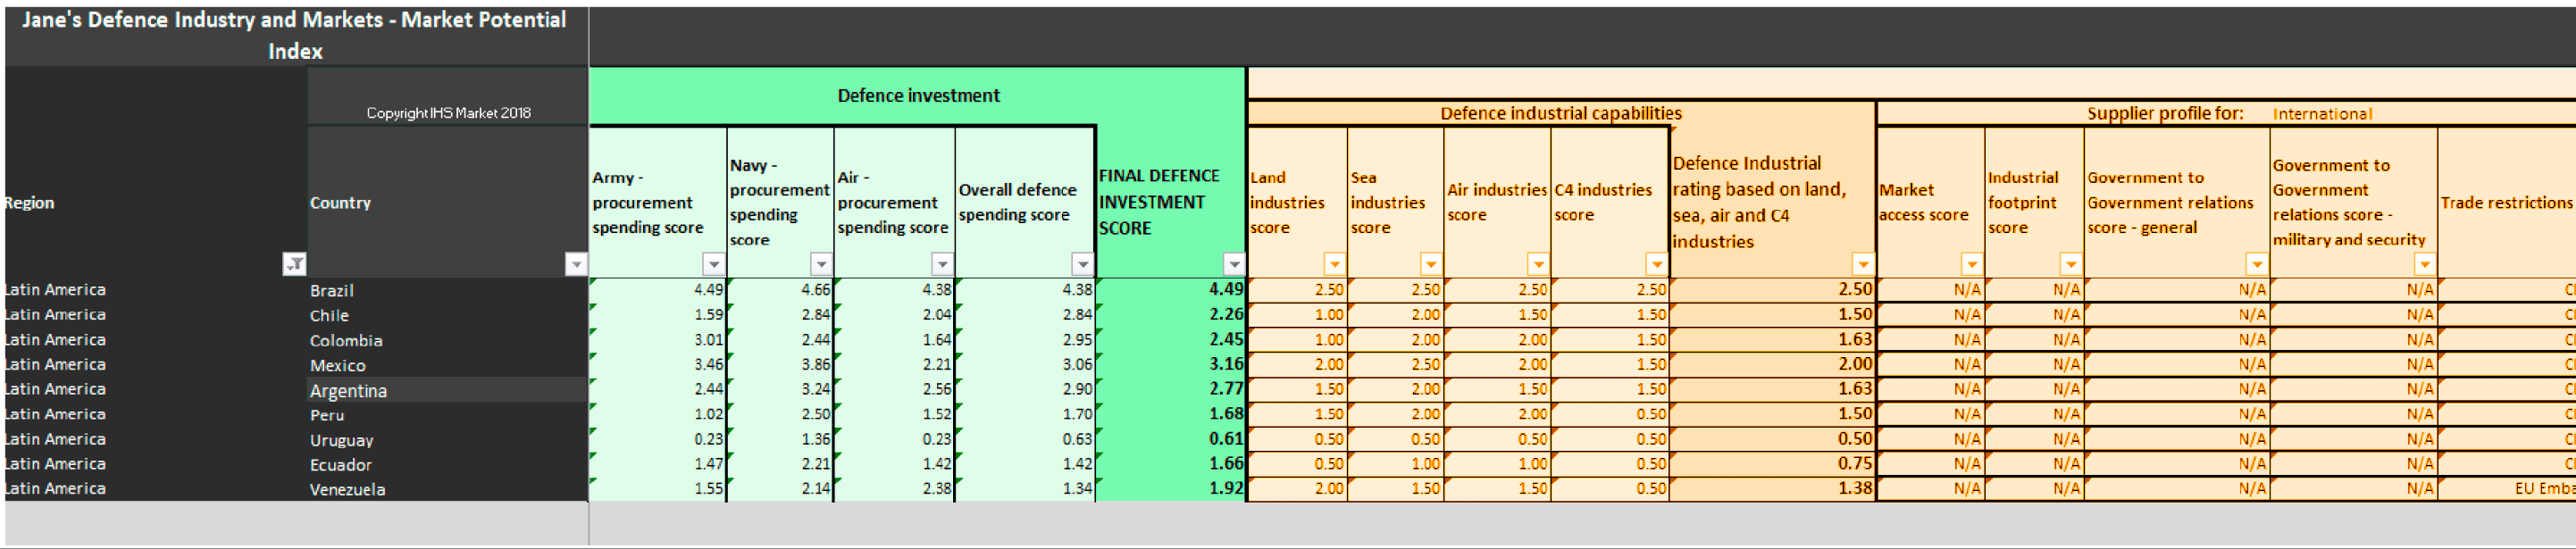 Image of world defence markets potential